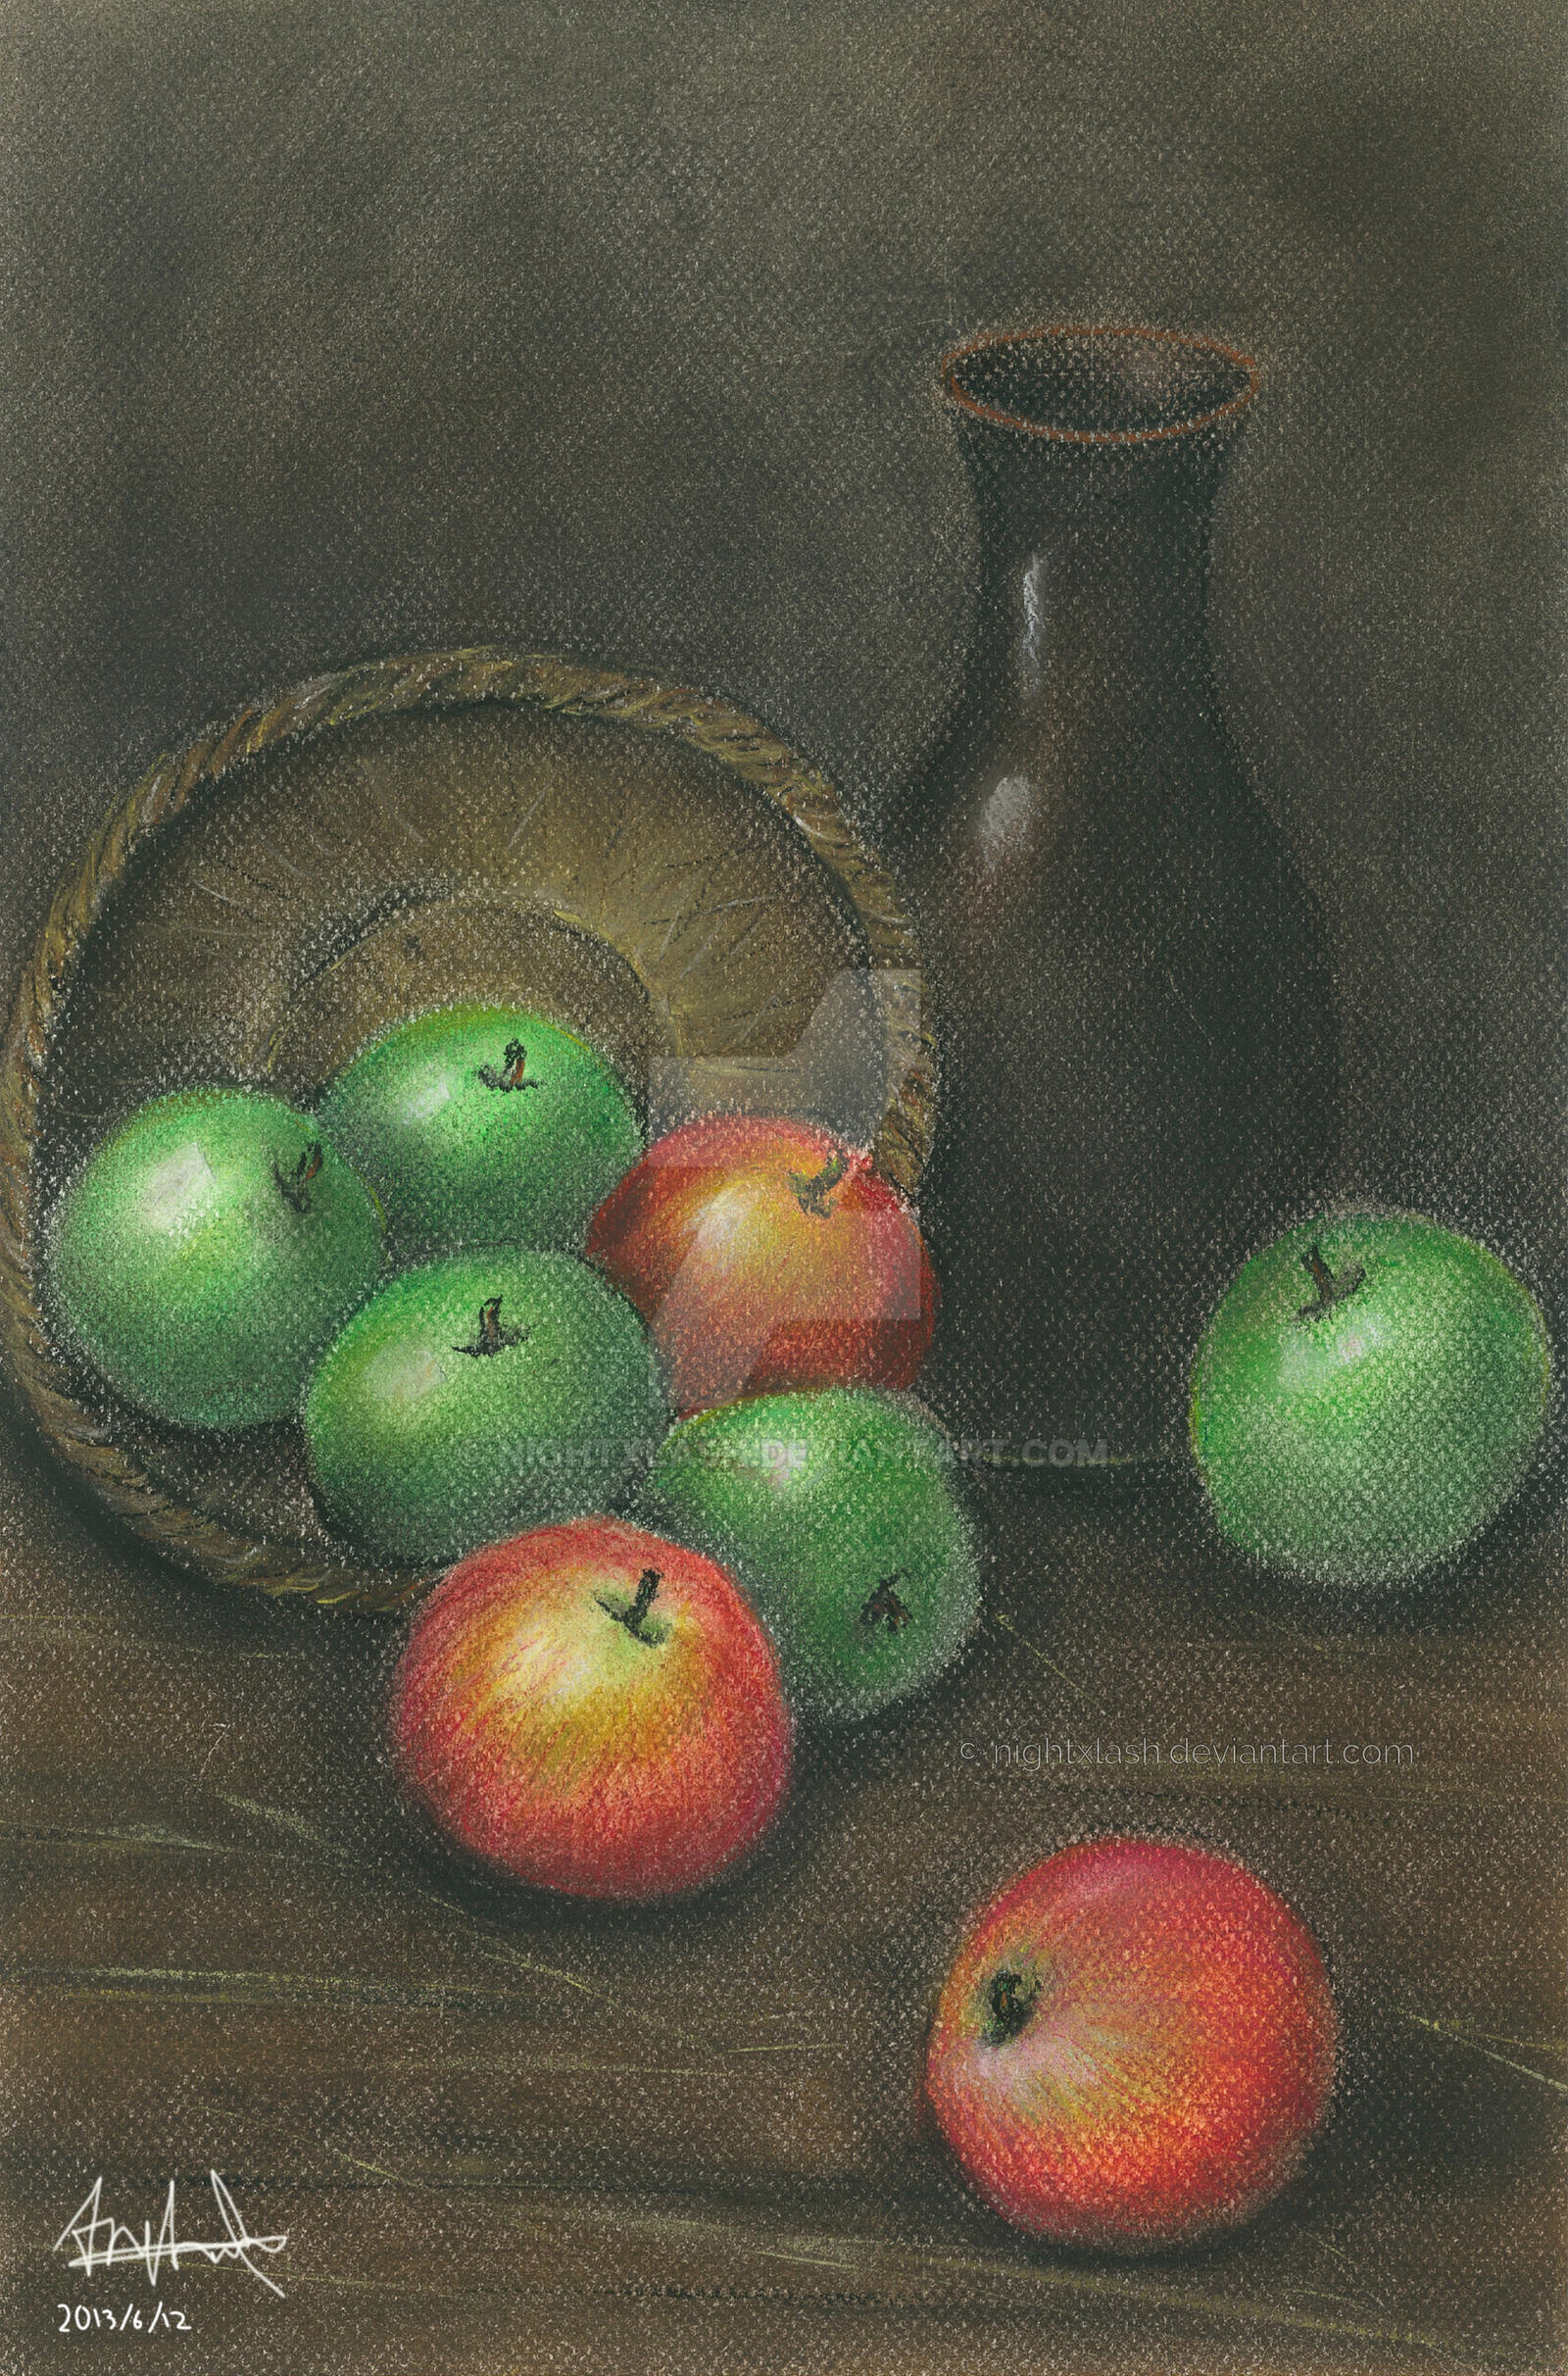 Basket and Apples